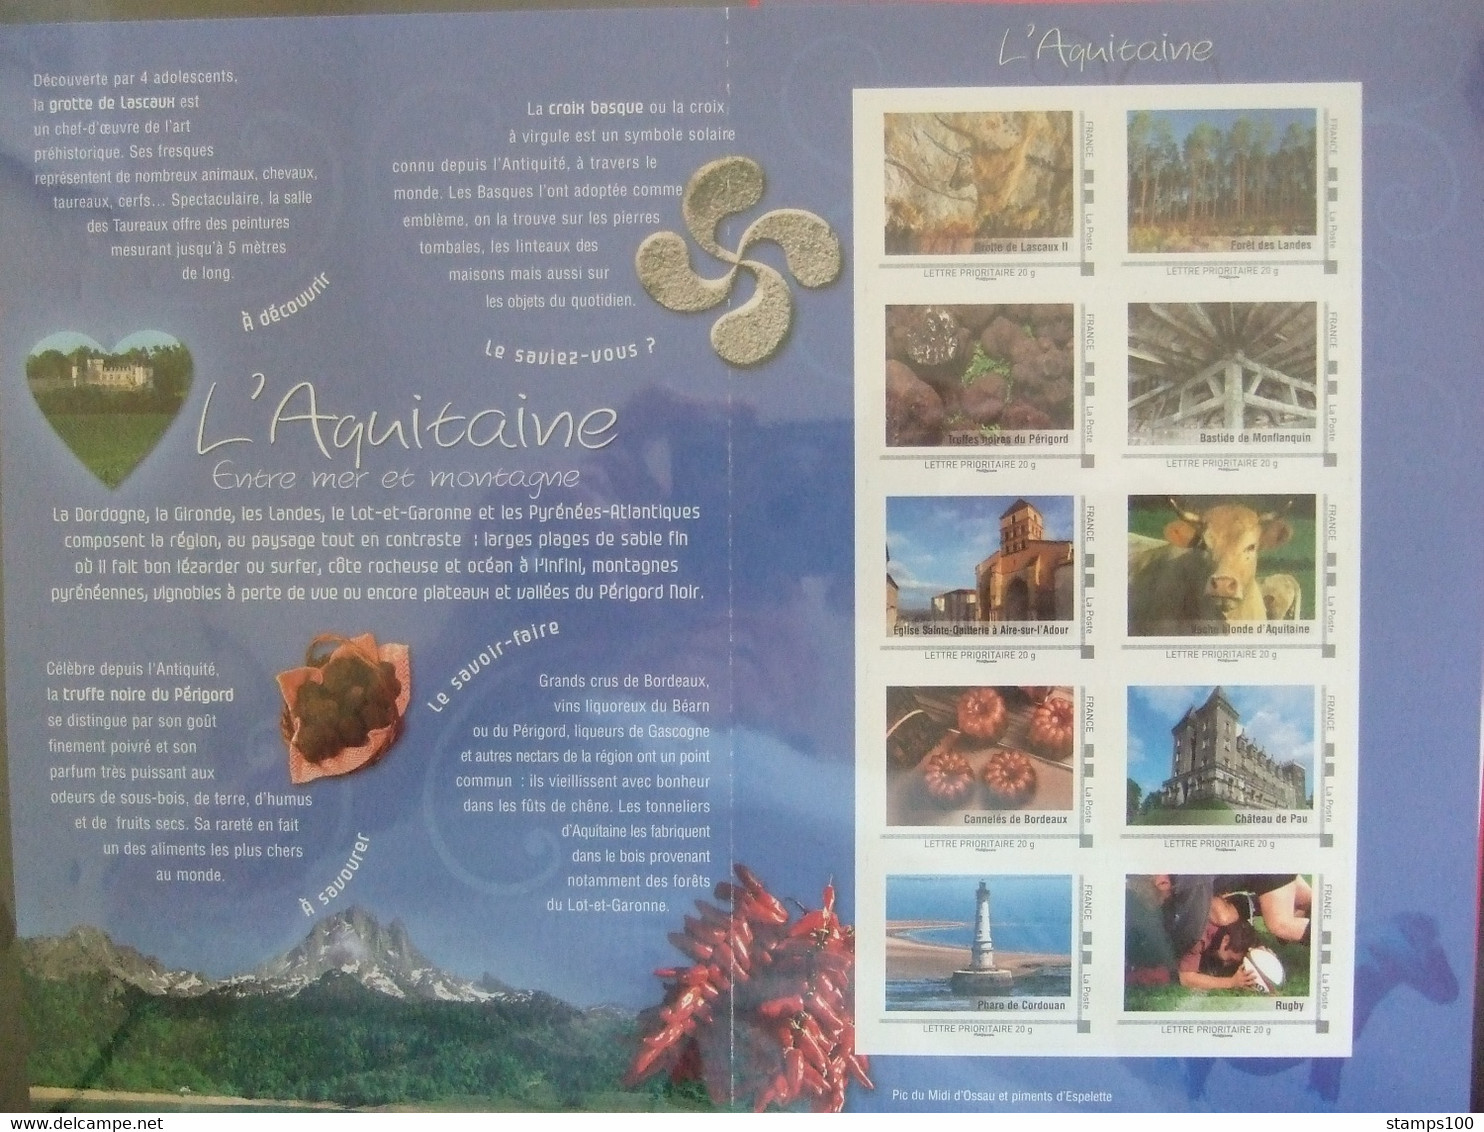 FRANCE Collector 2009 L'Aquitaine (with Ititneraire Timbre)  MNH**. (PPZ3-890)2009 - Collectors